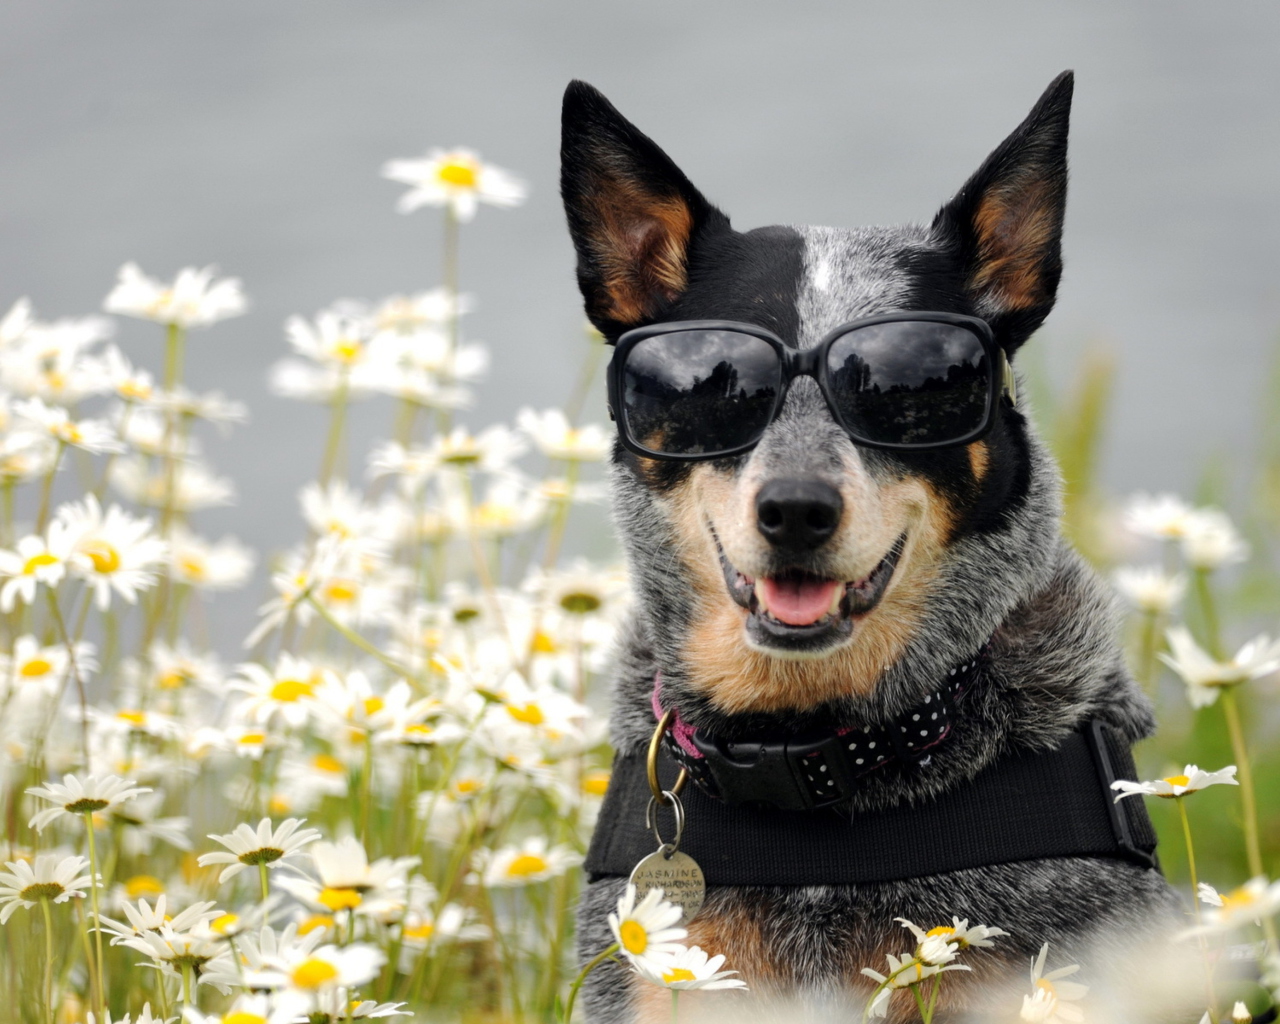 Dog, Sunglasses And Daisies wallpaper 1280x1024